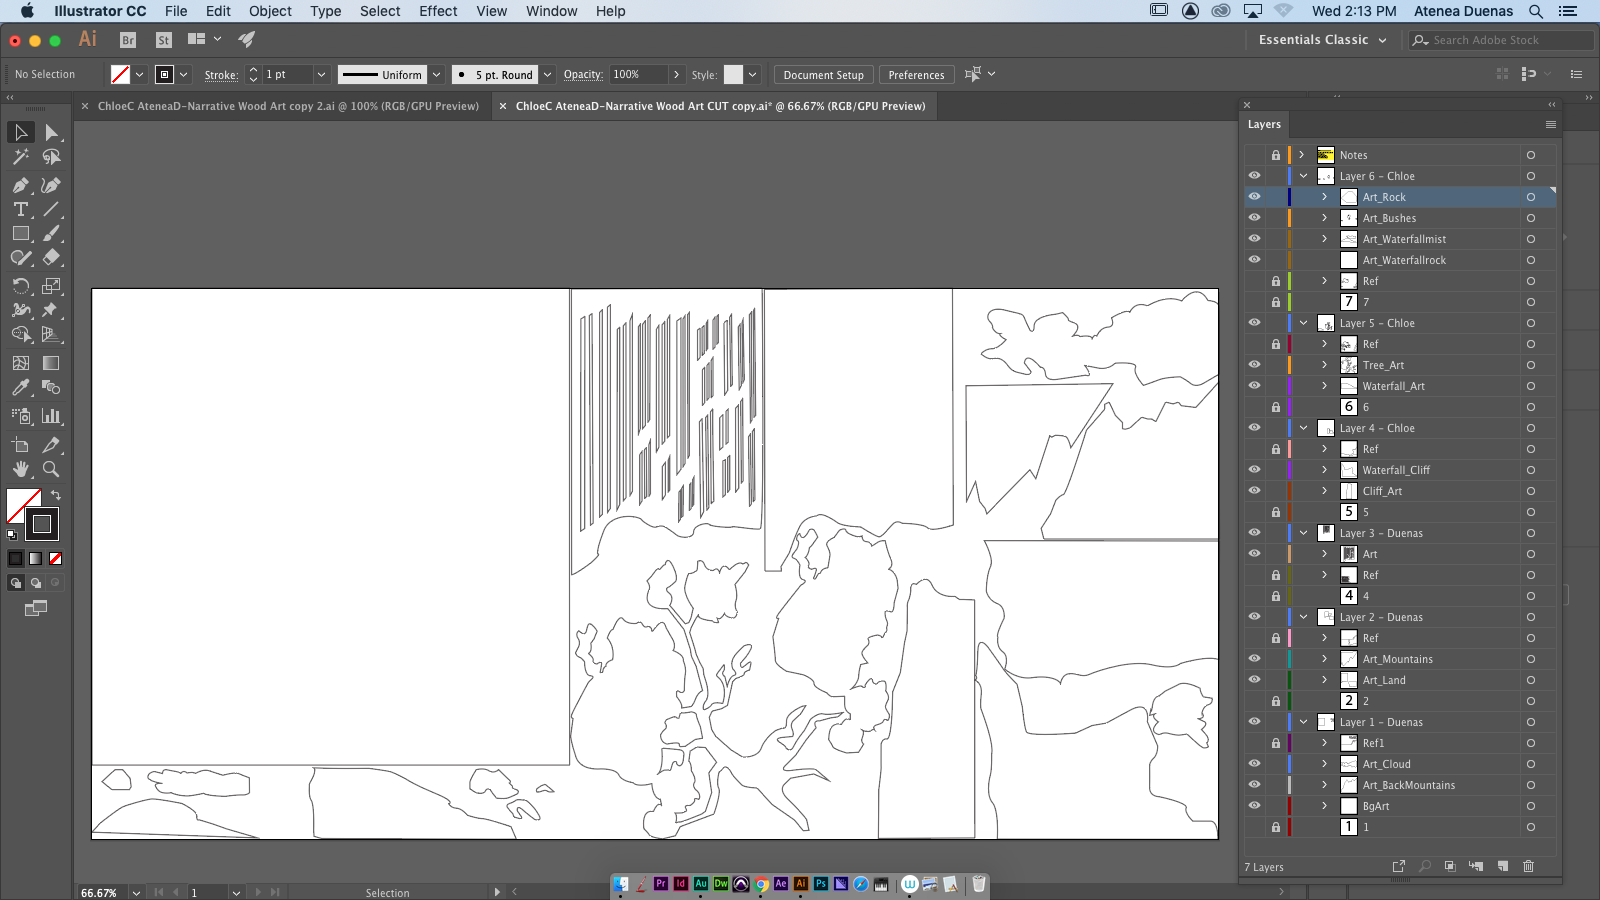 Another screenshot of the Illustrator file, but all set for cutting